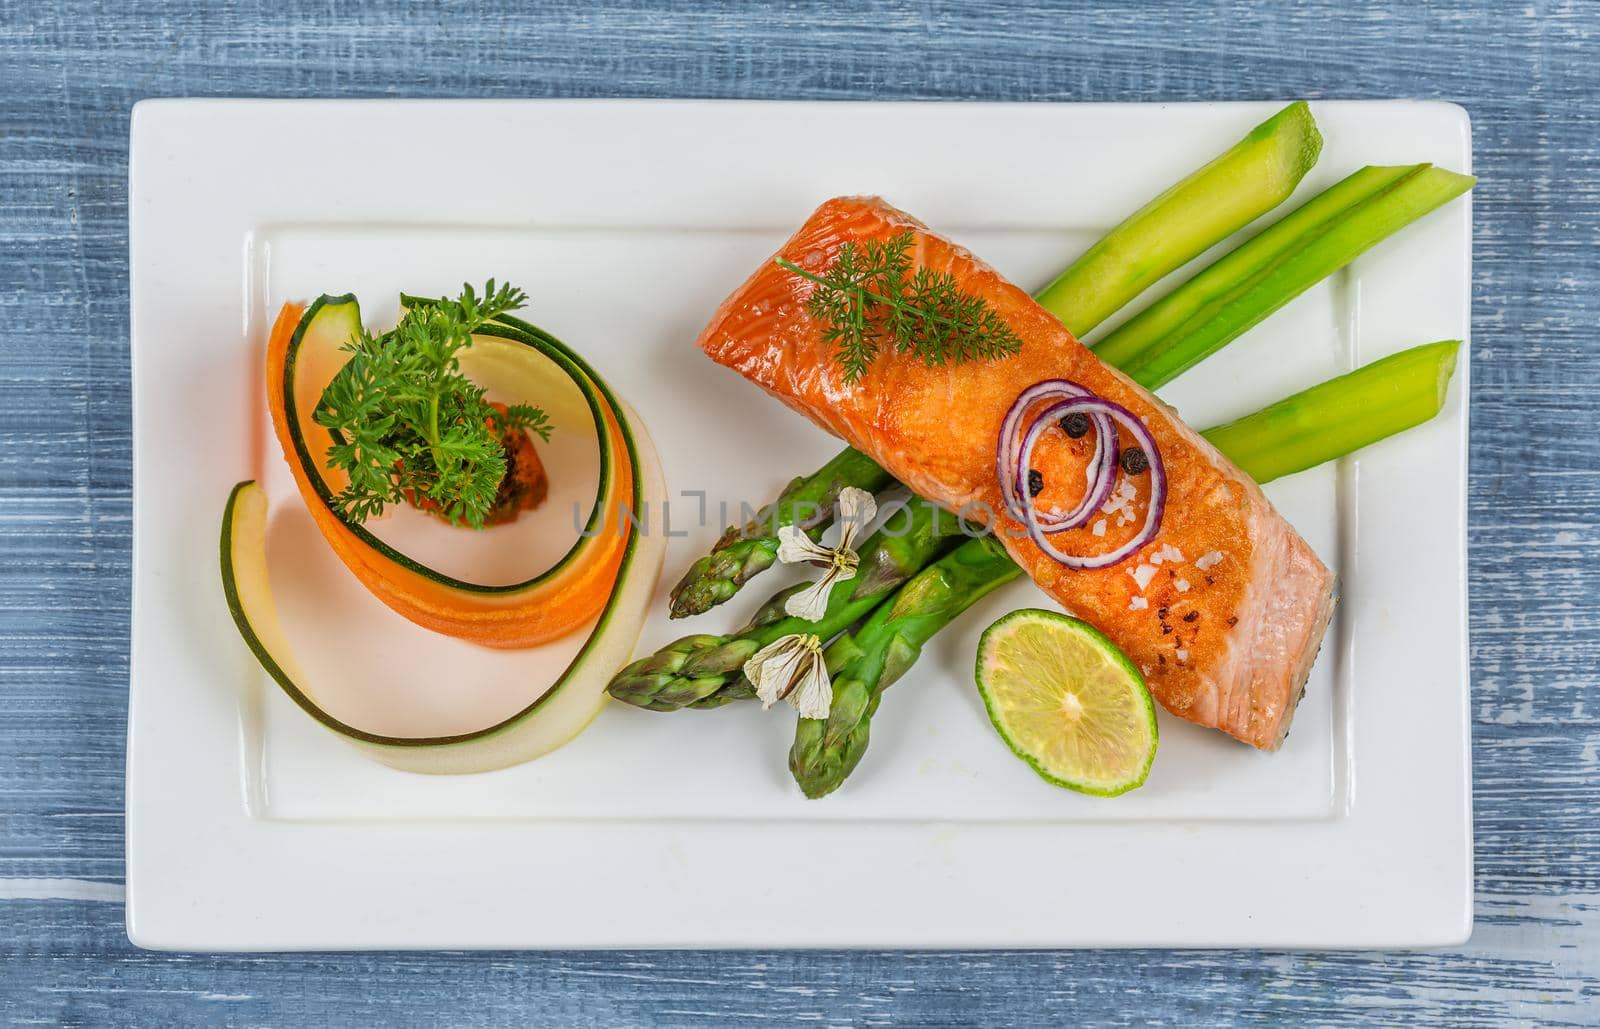 Mininalist presentation of a plate of salmon and vegetables - top view